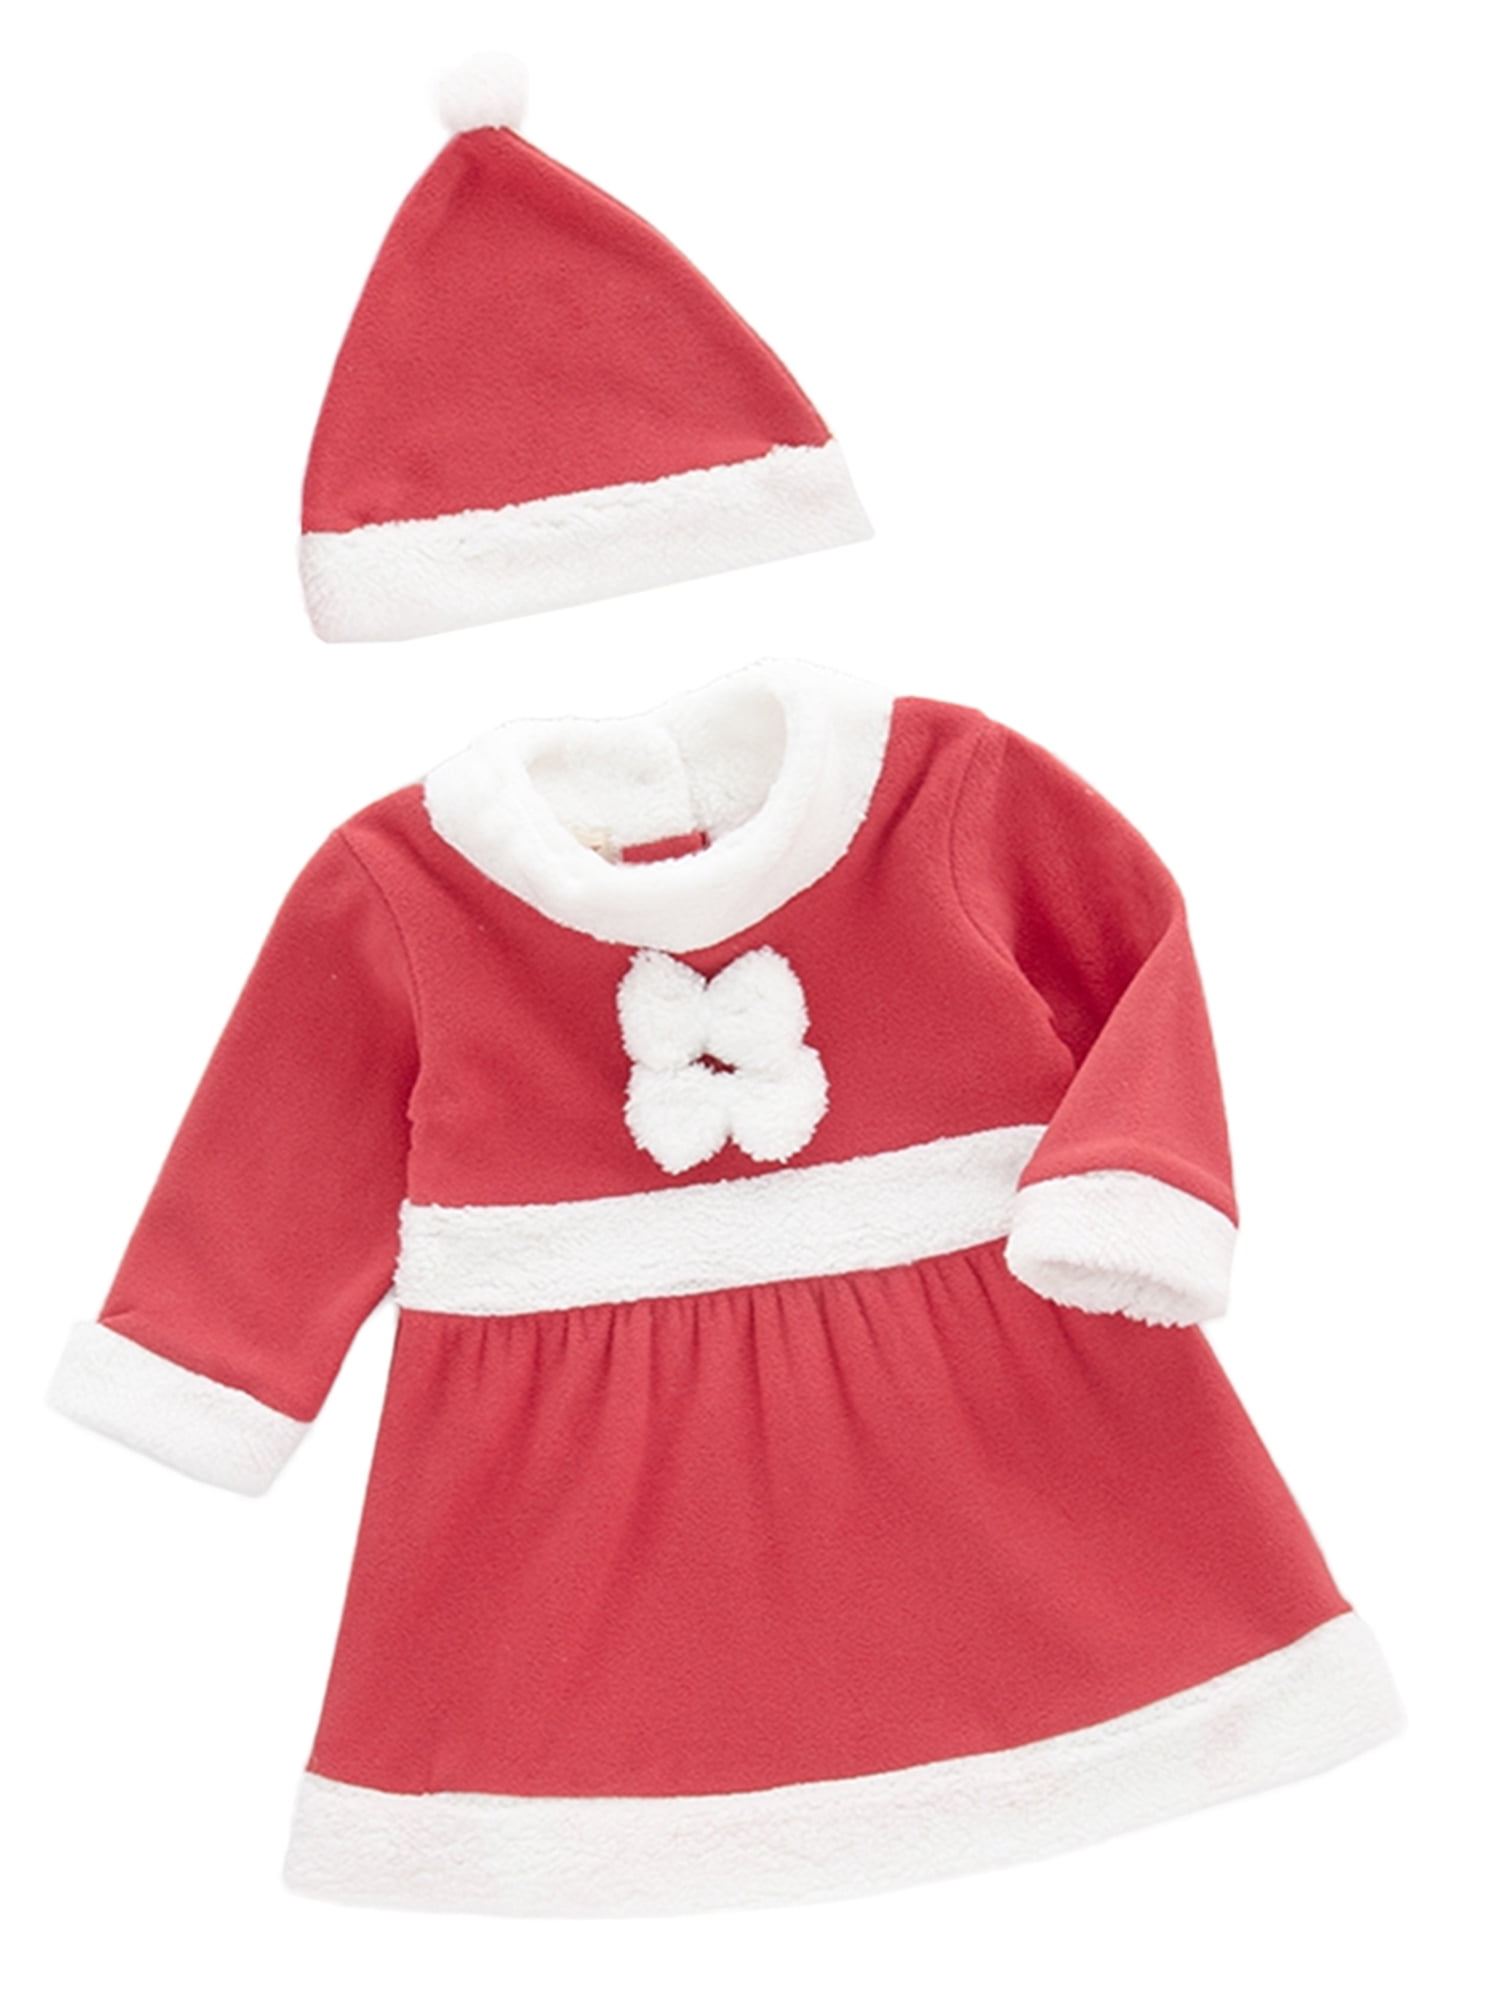 Kid Girls Boys Christmas Costume Outfit Santa Claus Suit Party Holiday Dancewear